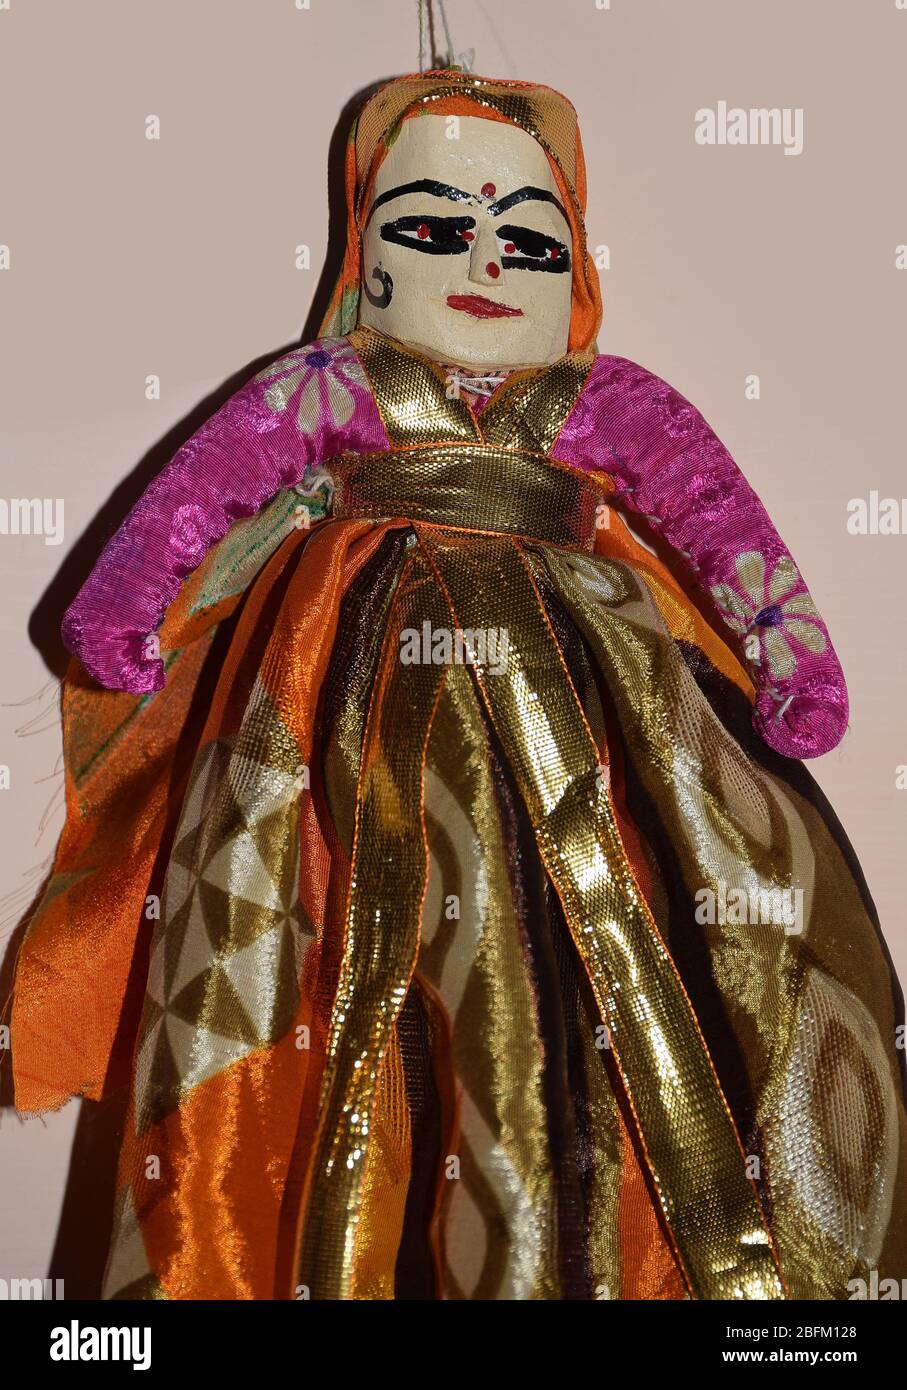 Rajasthani Female Doll Puppet or Kathputli attached from string is isolated on a light background.  Rajasthan Indian Puppets are referred as Kathputli Stock Photo